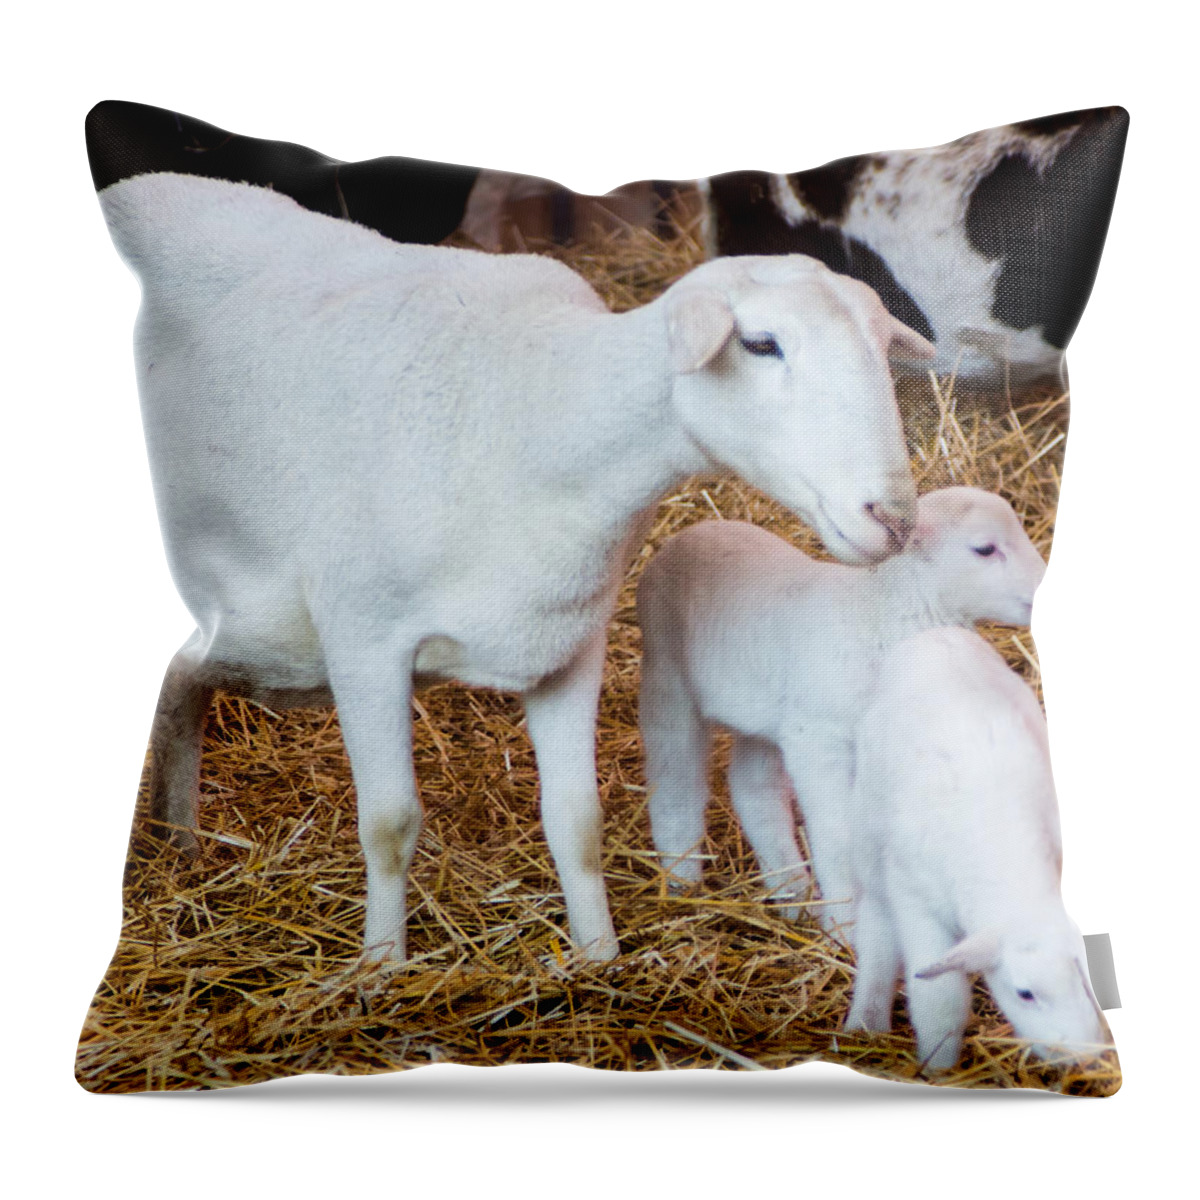 Mother Throw Pillow featuring the photograph Momma and Newborns by Photographic Arts And Design Studio